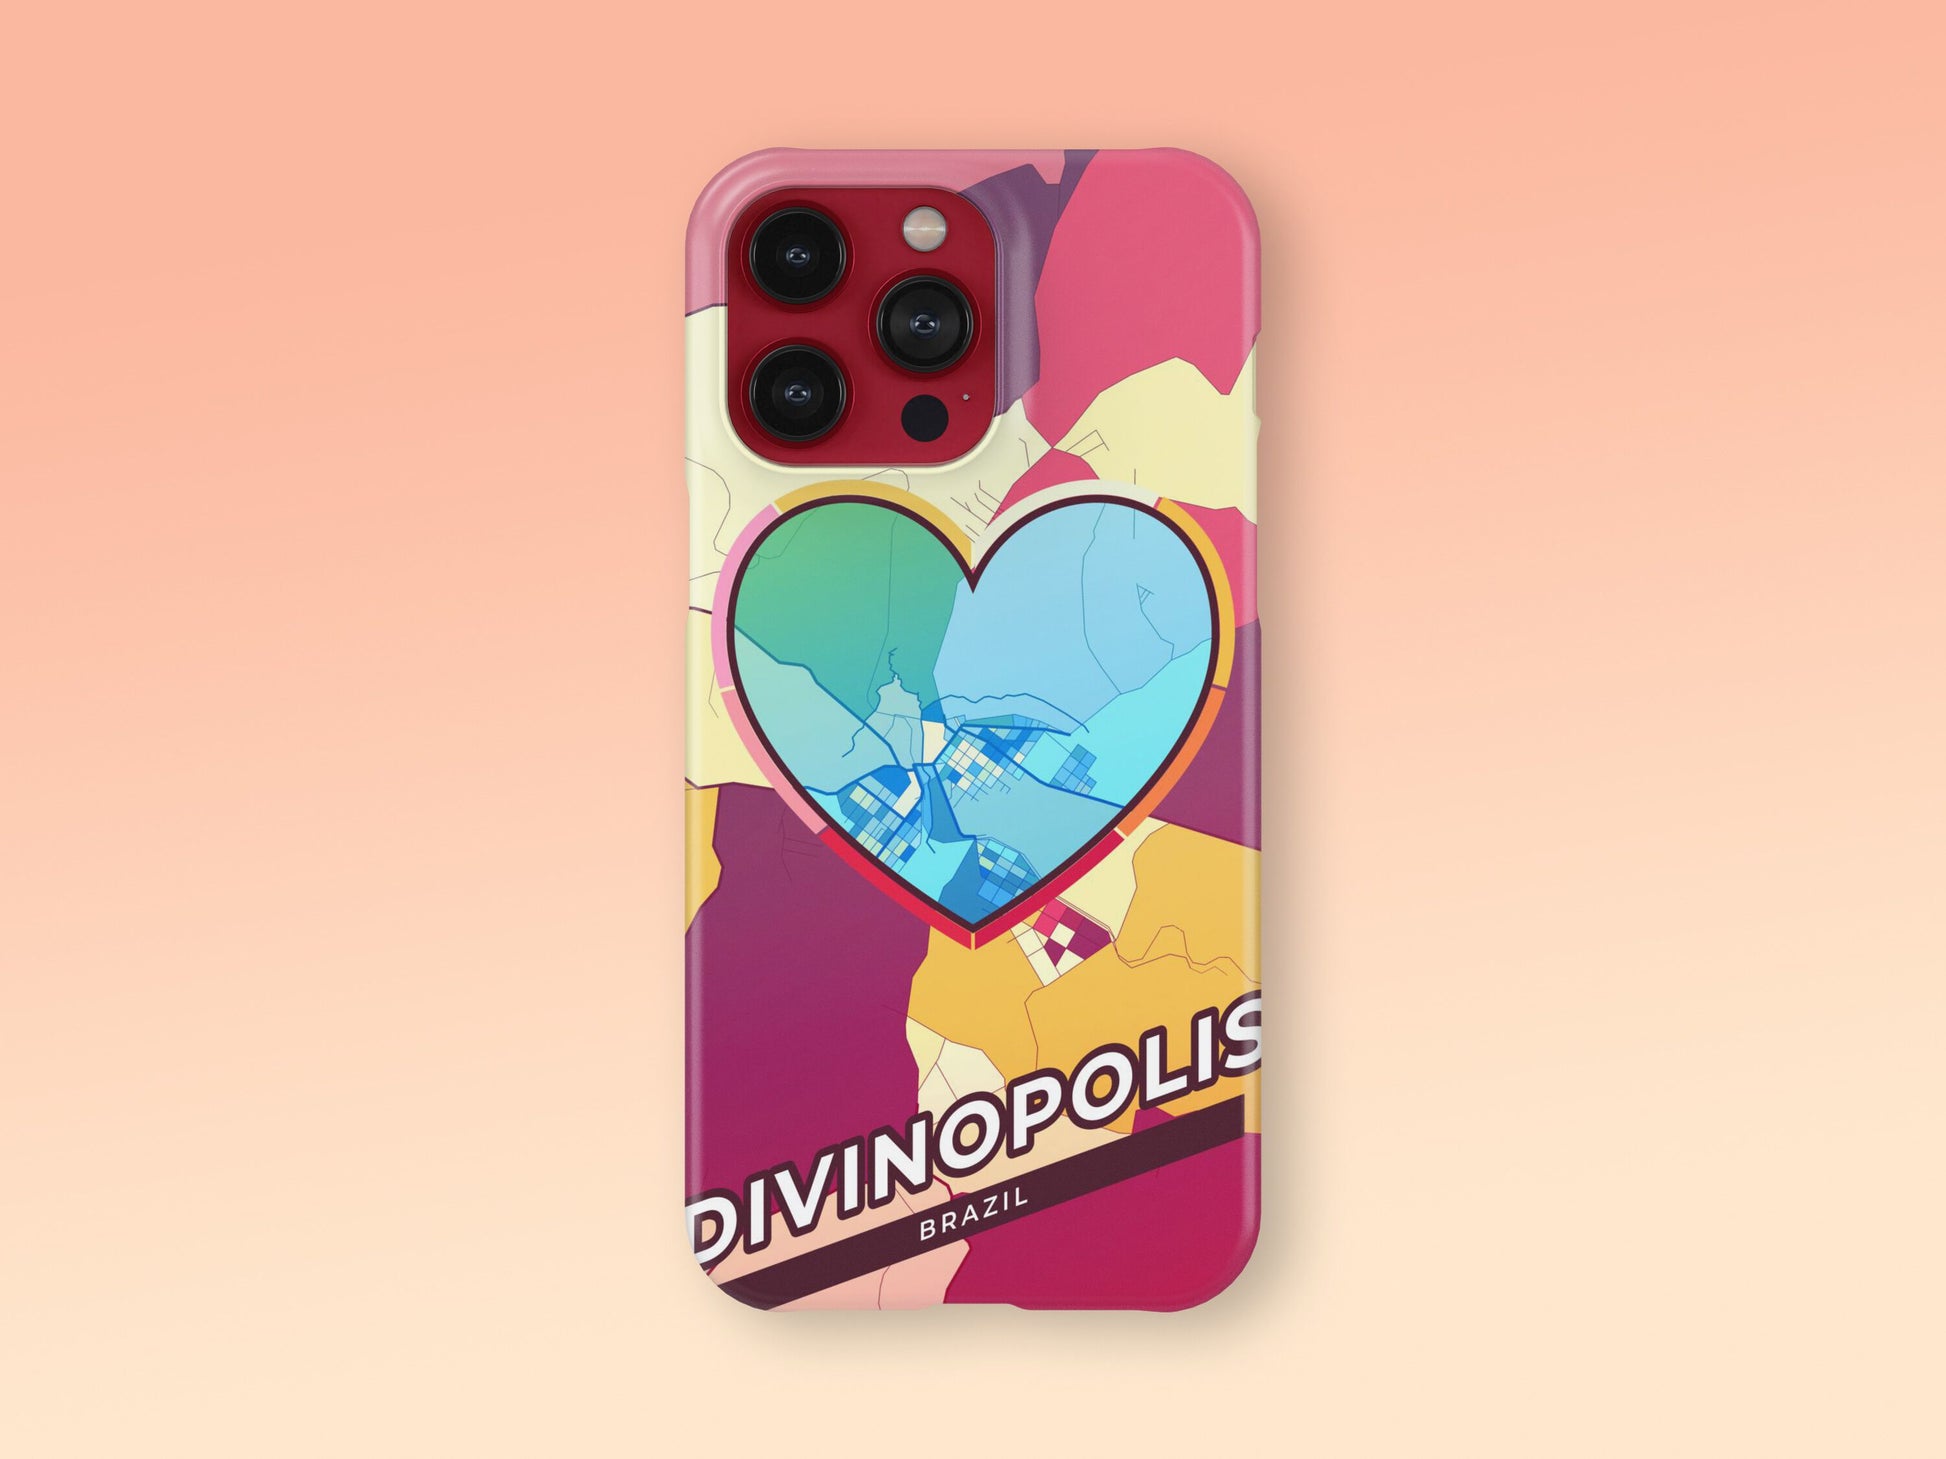 Divinopolis Brazil slim phone case with colorful icon. Birthday, wedding or housewarming gift. Couple match cases. 2